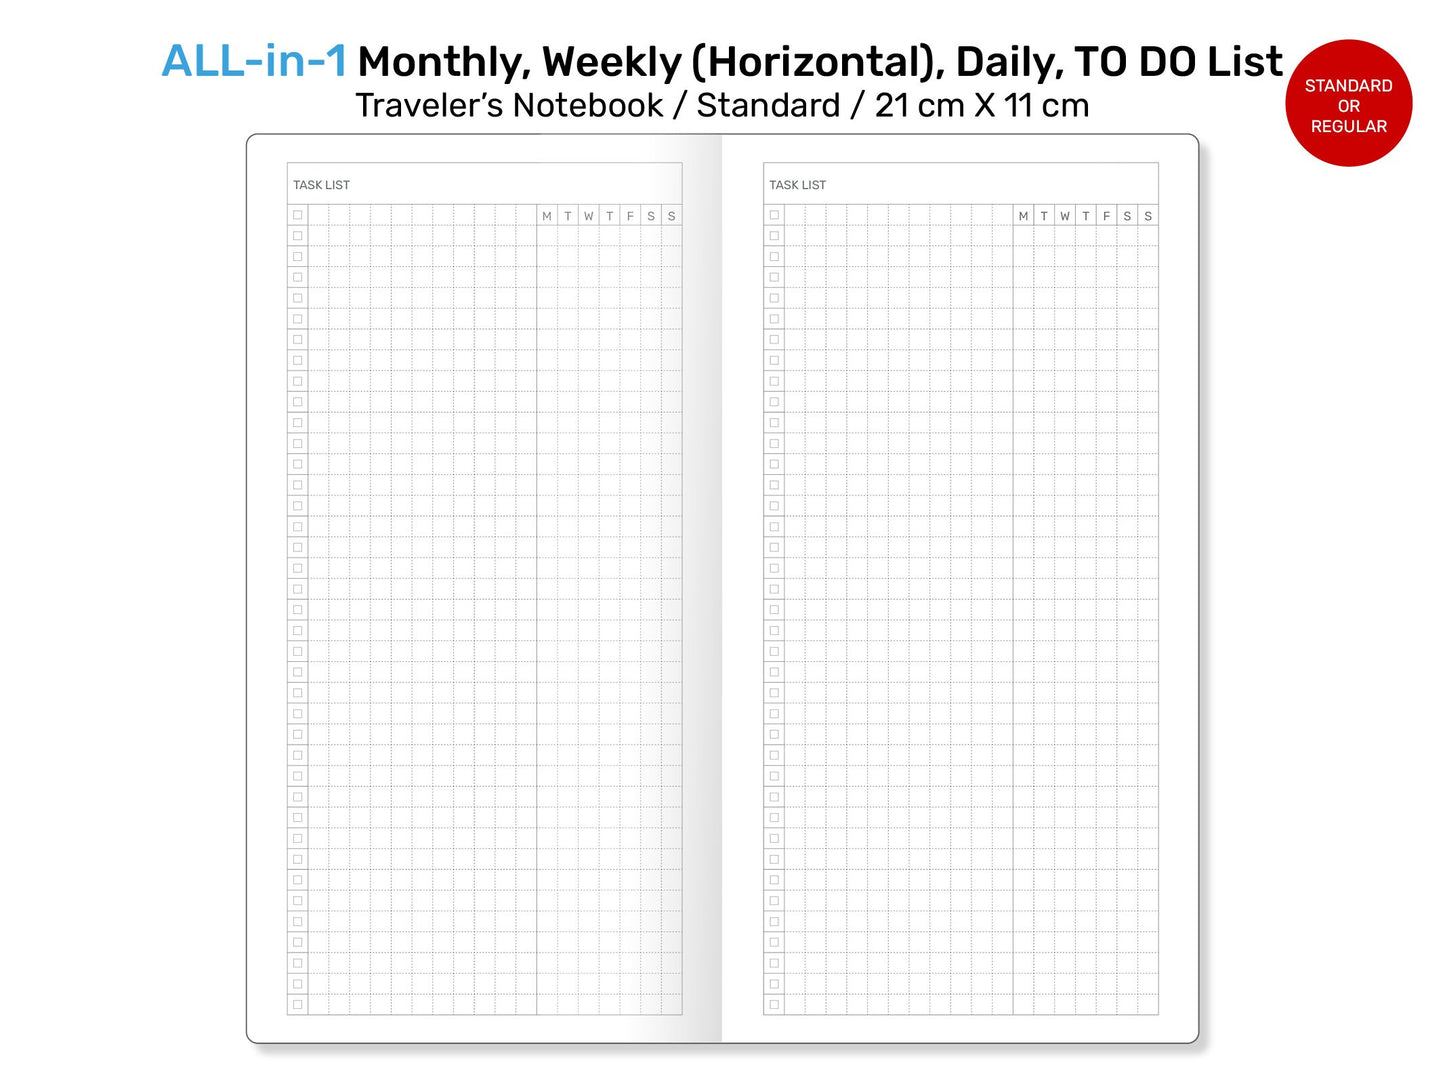 Standard TN ALL-in-1 Monthly, Weekly HORIZONTAL, Daily, List Printable Traveler's Notebook Refill Insert - Minimalist Functional RTN22-004